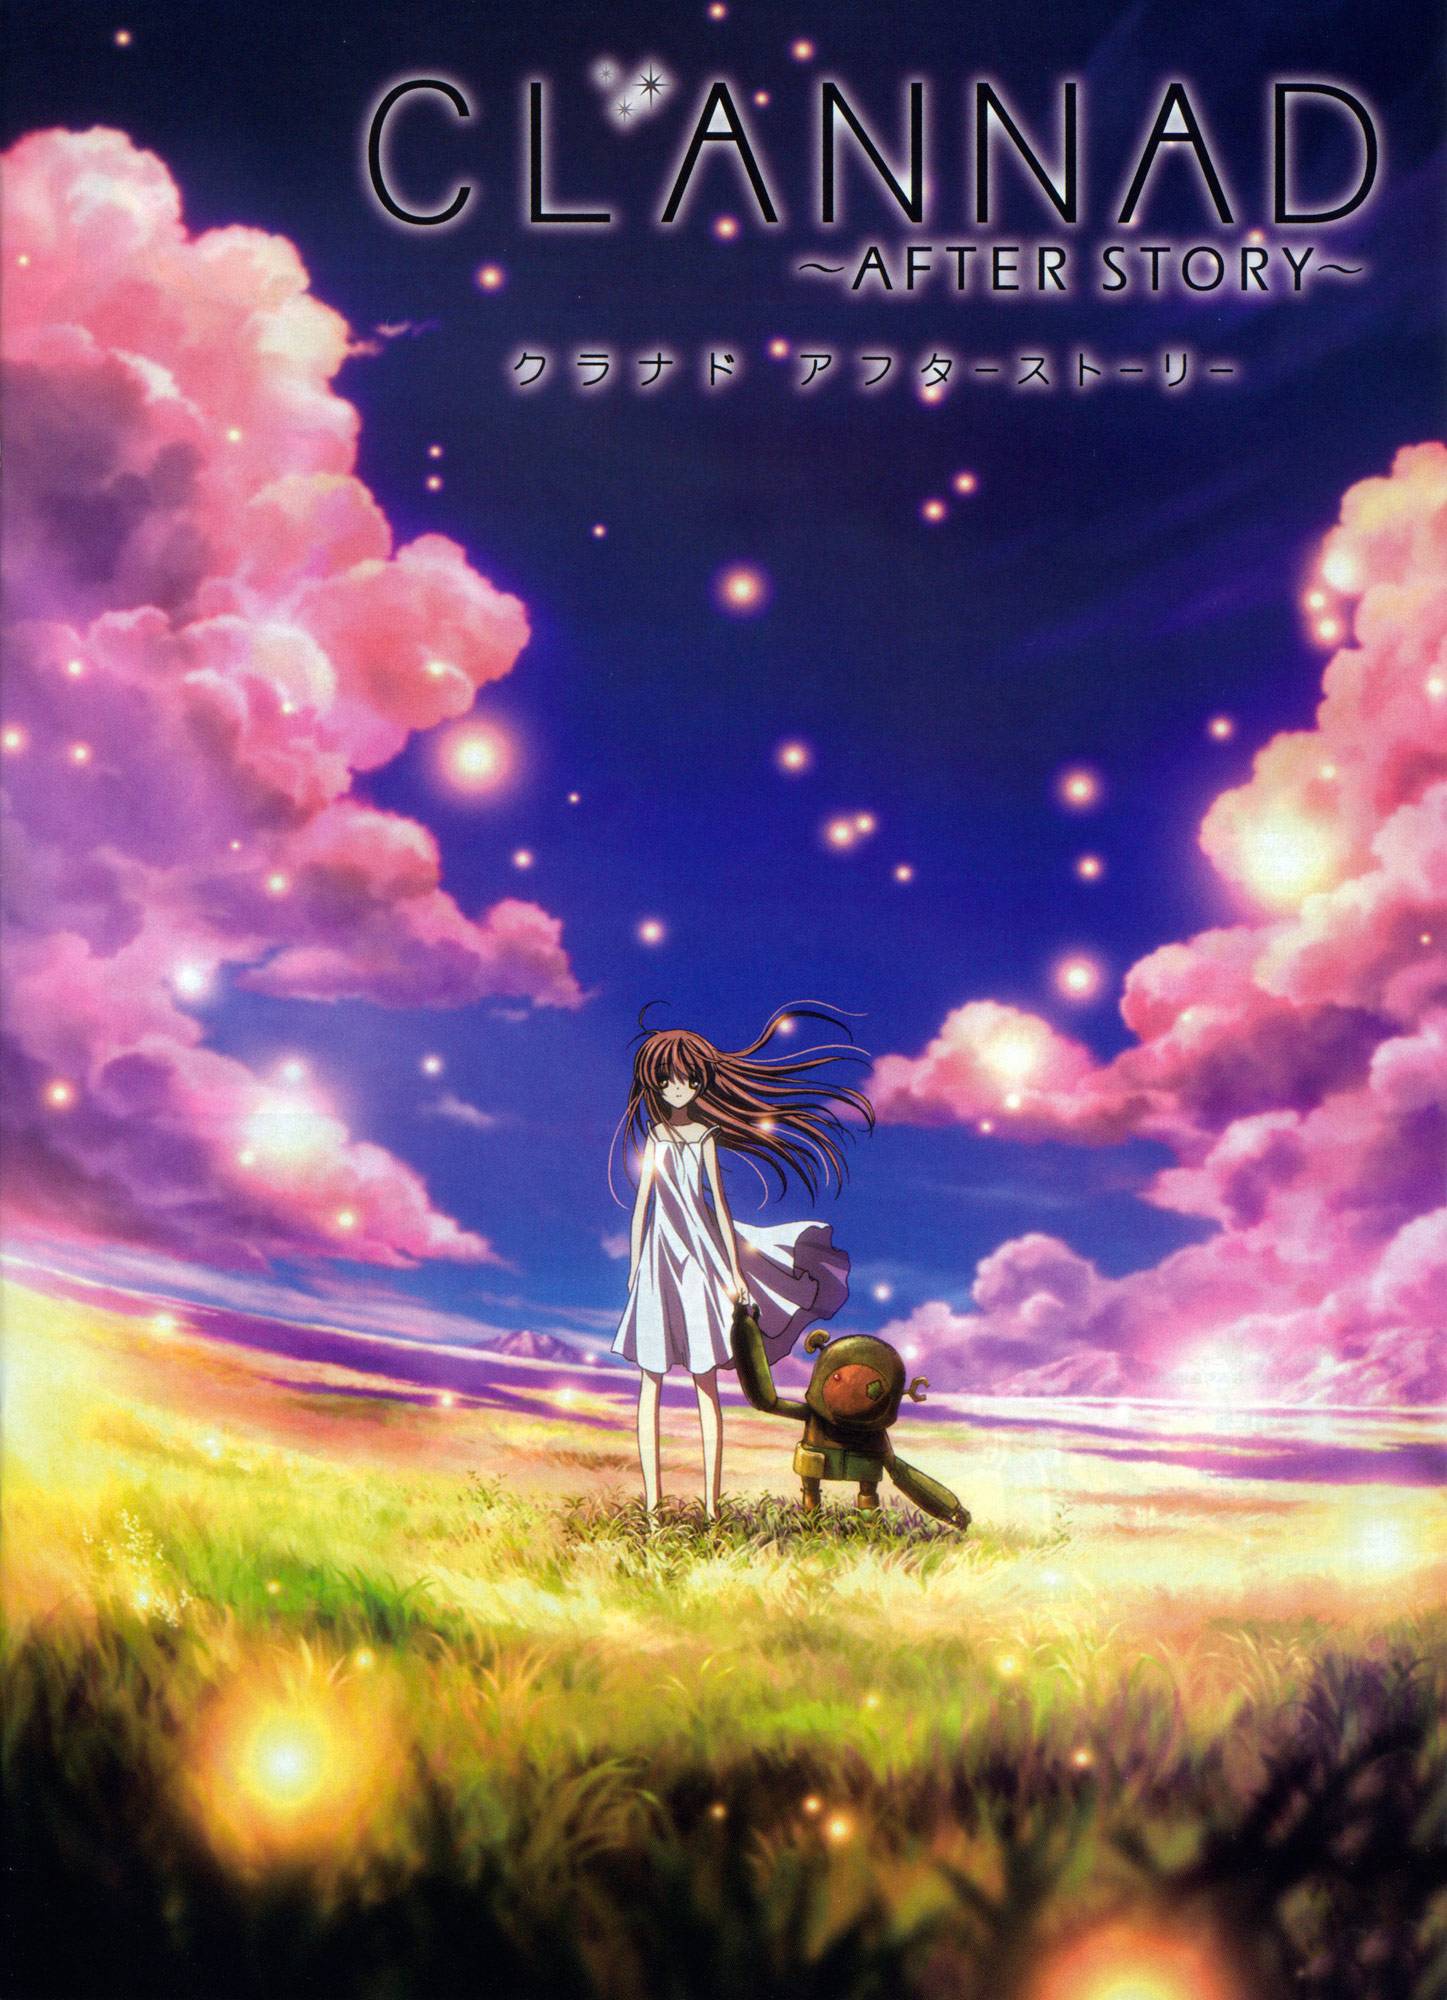 Clannad + After Story (2007-2009)